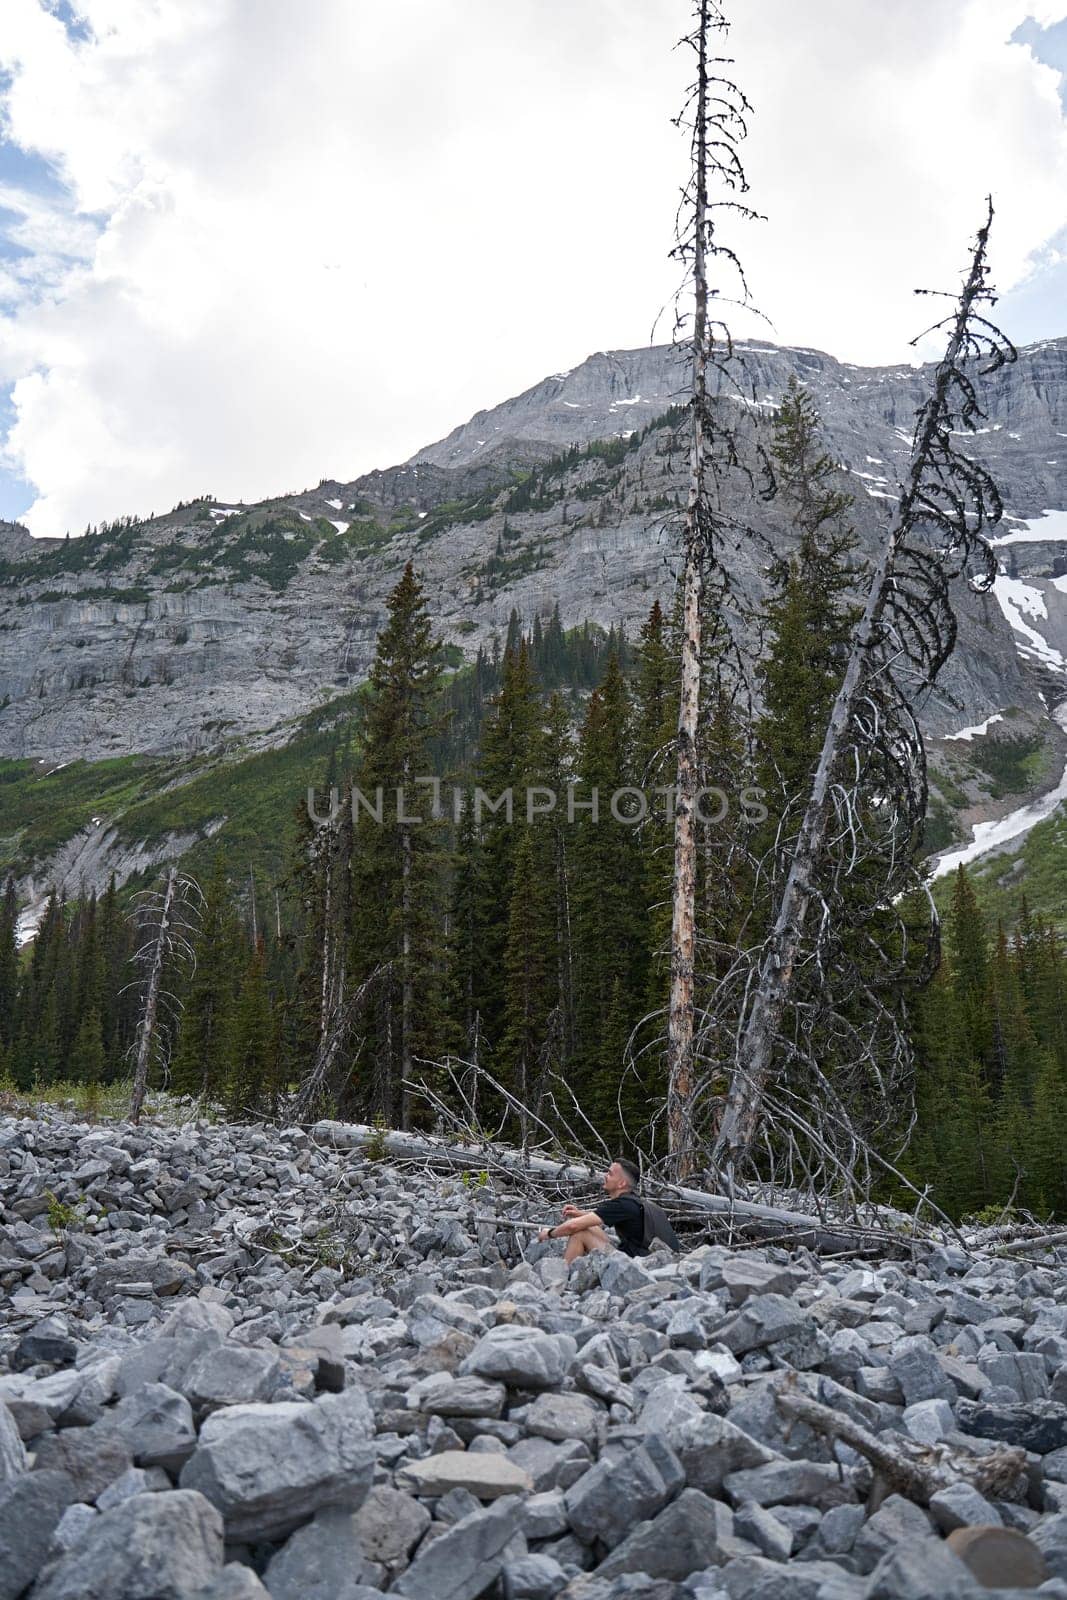 A man sits near the forest on an old dry log around stones after a landslide with a view of rocky mountains